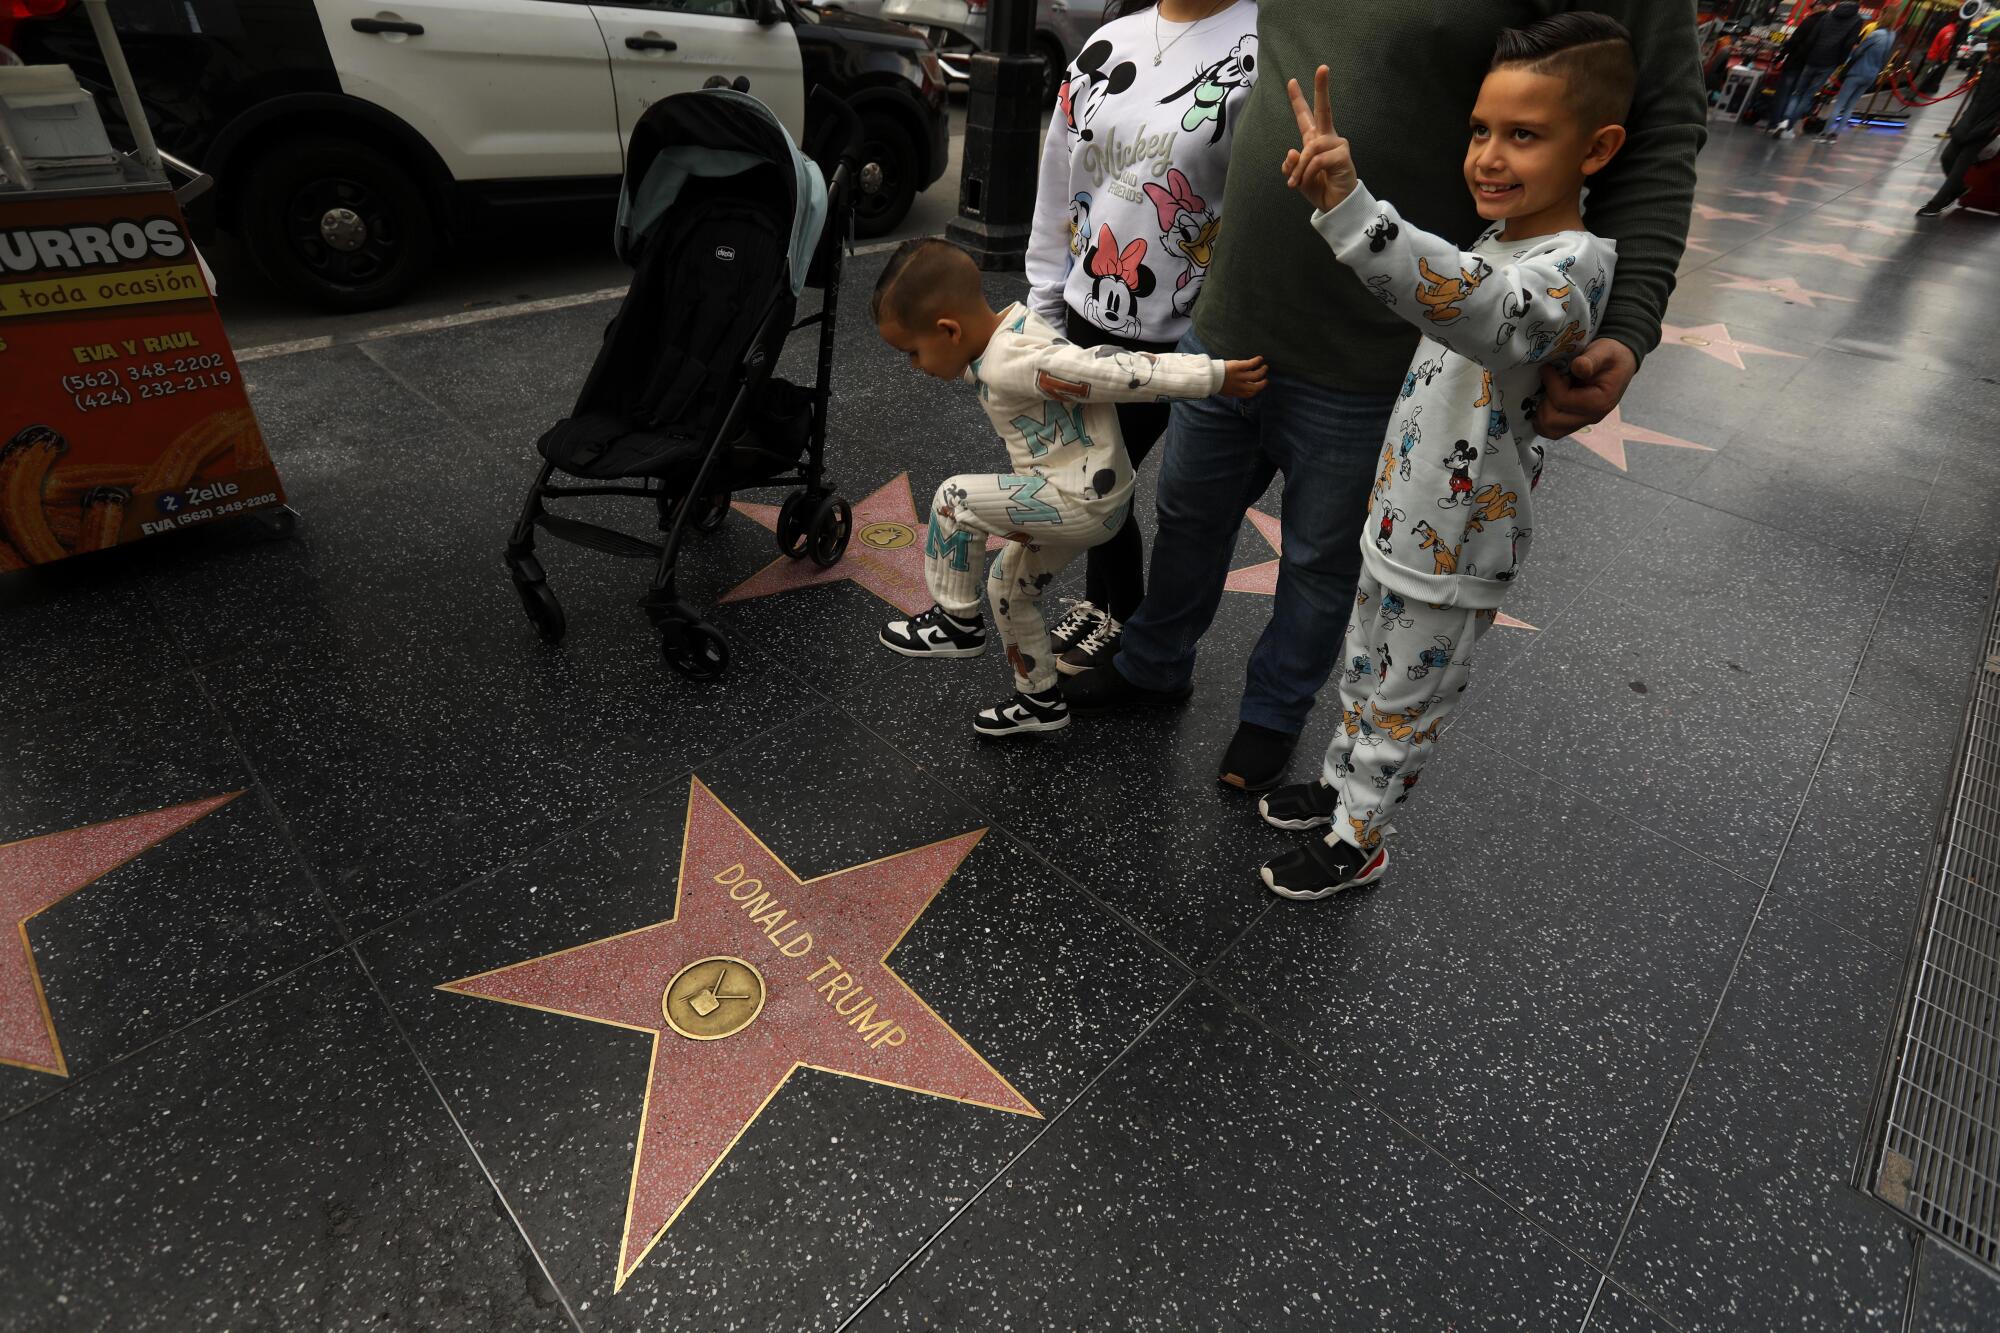 Visitors pose for pictures next to Donald Trump's star on the Hollywood Walk of Fame in Hollywood on Dec. 22.